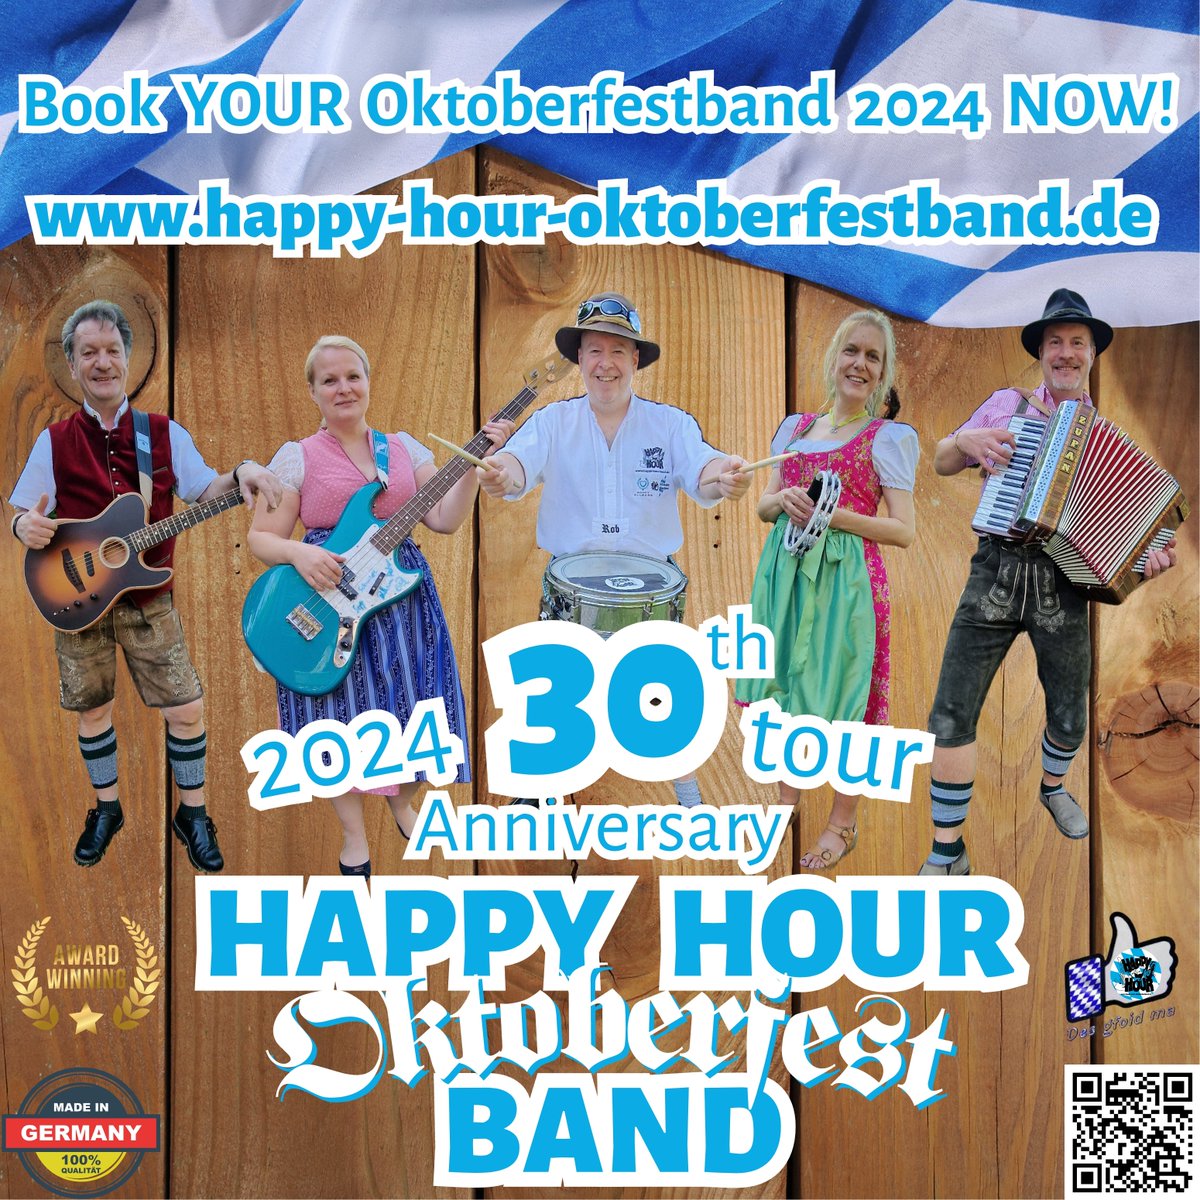 HAPPY HOUR OKTOBERFESTBAND - 30th Anniversary tour 2024 - We're celebrating our 30th Anniversary this year! And we hope YOU are all celebrating YOUR Oktoberfest in a most authentic style with US! Check out our upcoming tourdates and updates on happy-hour-oktoberfestband.de